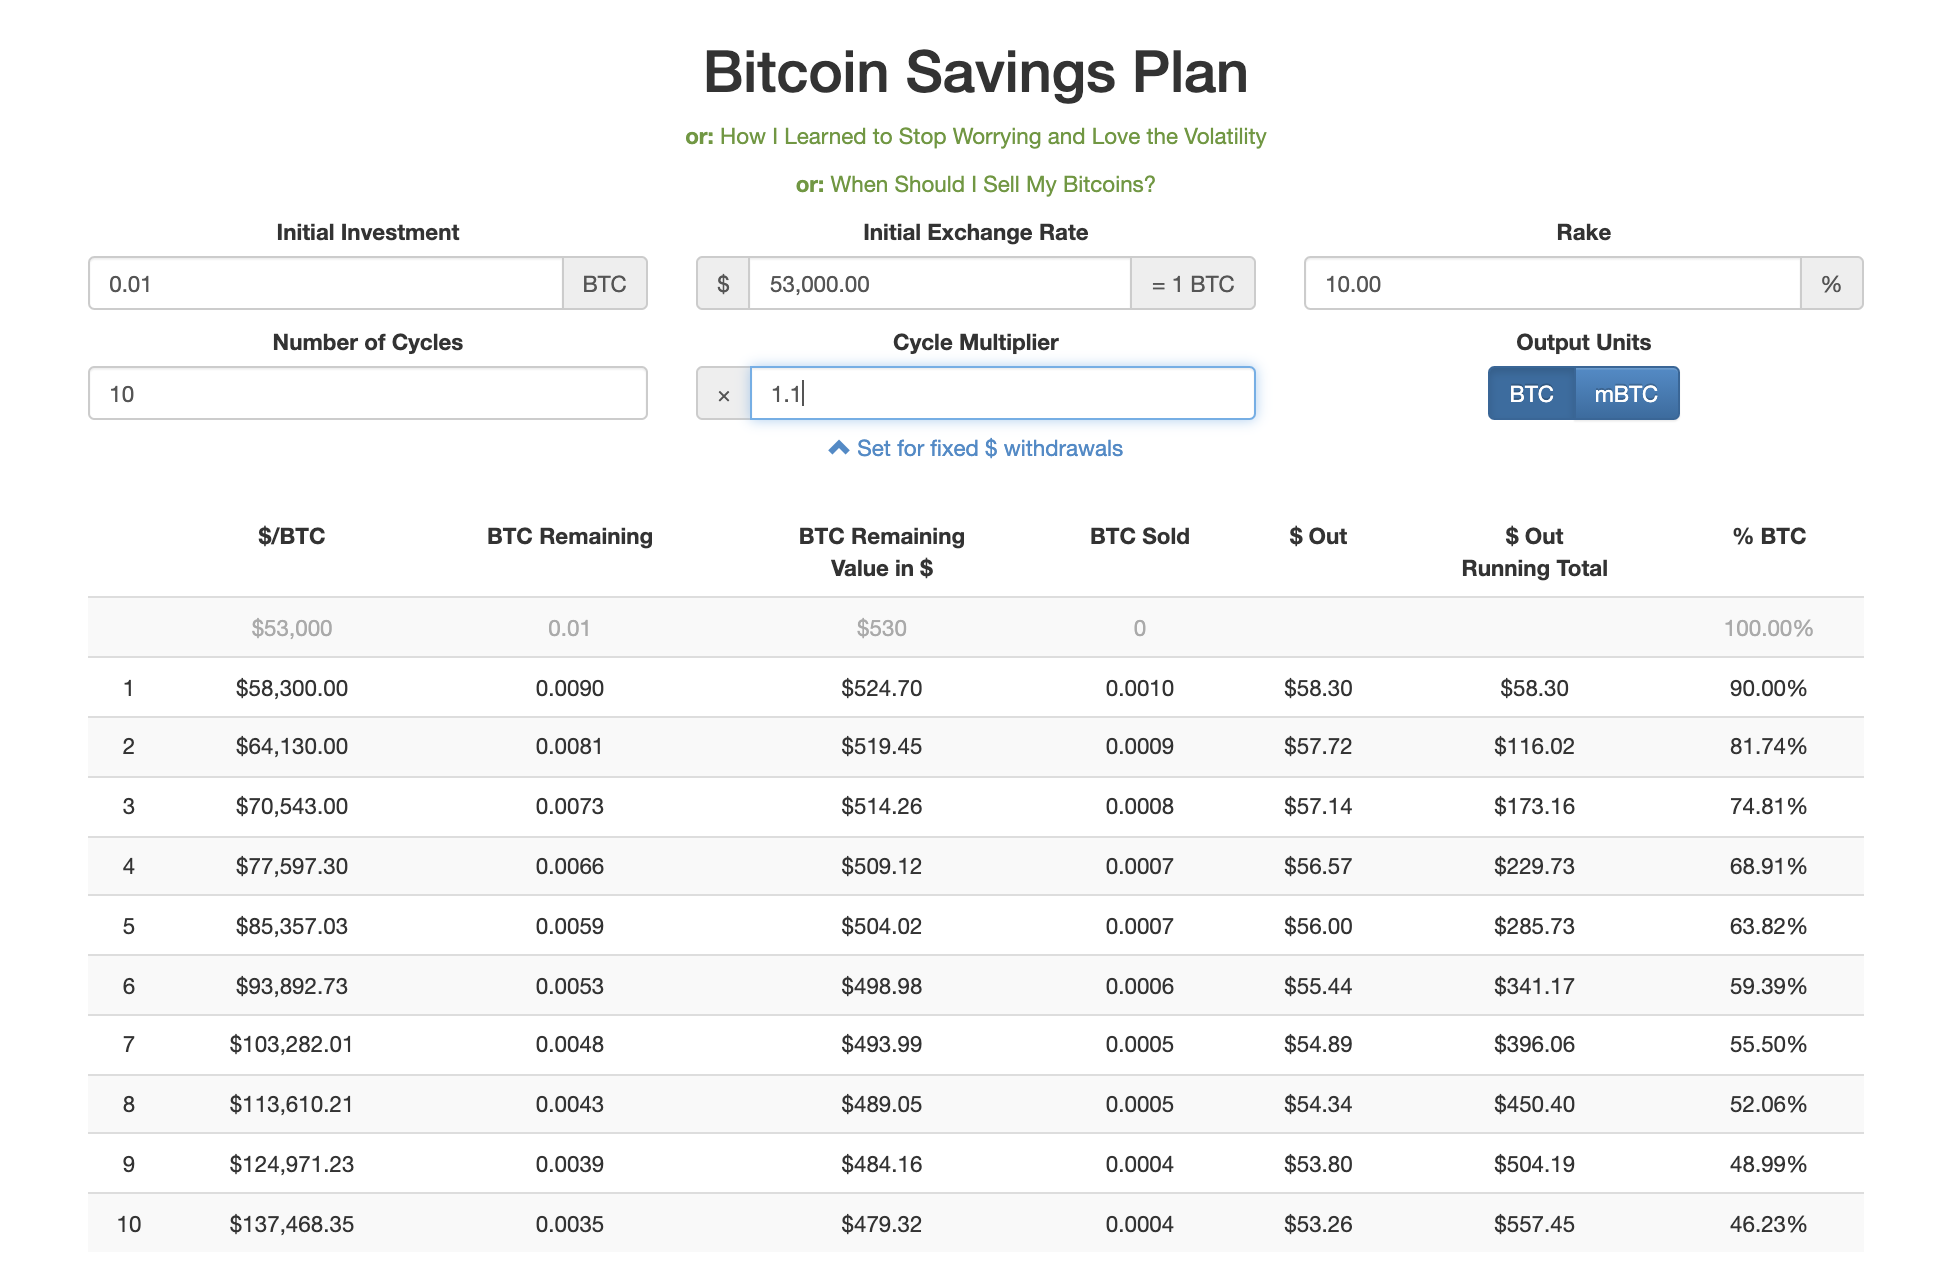 When to sell Bitcoin - realistic savings plan